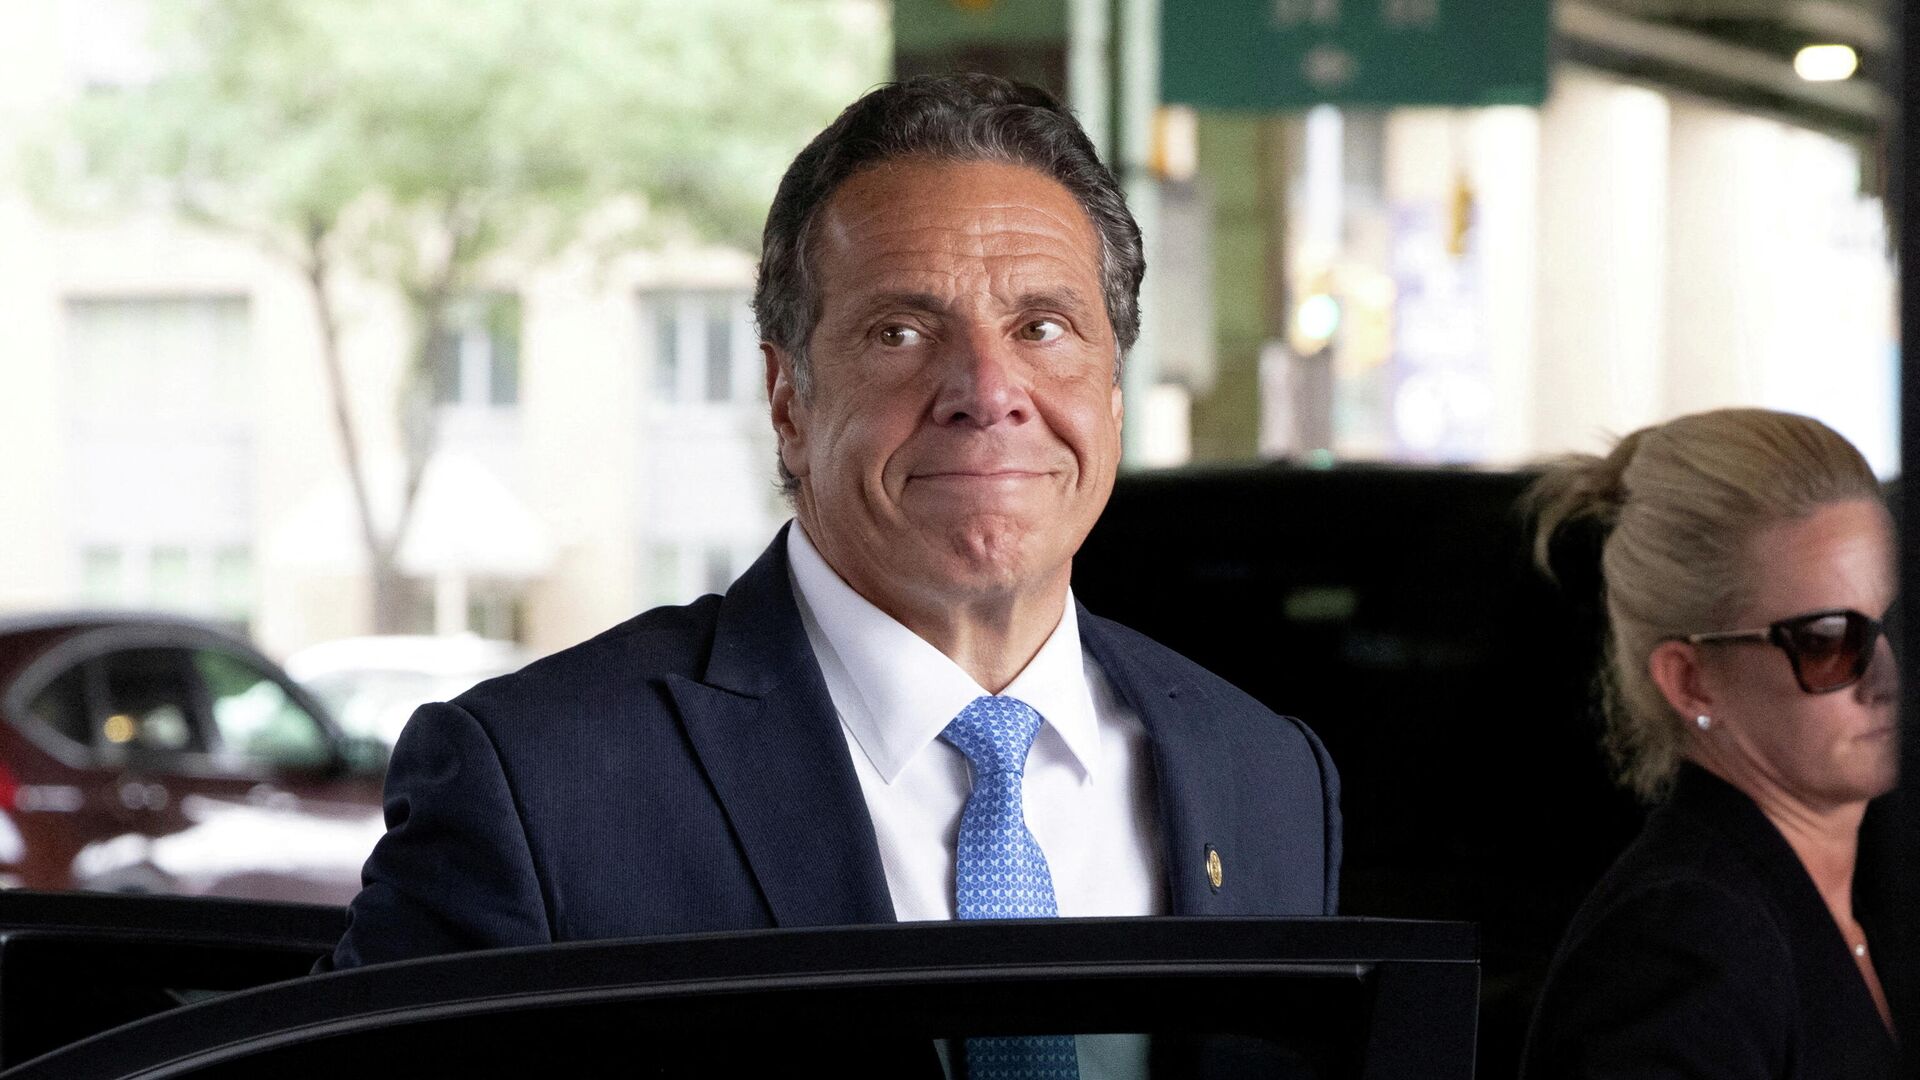 FILE PHOTO: New York Governor Andrew Cuomo arrives to depart in his helicopter after announcing his resignation in Manhattan, New York City - Sputnik International, 1920, 01.02.2022